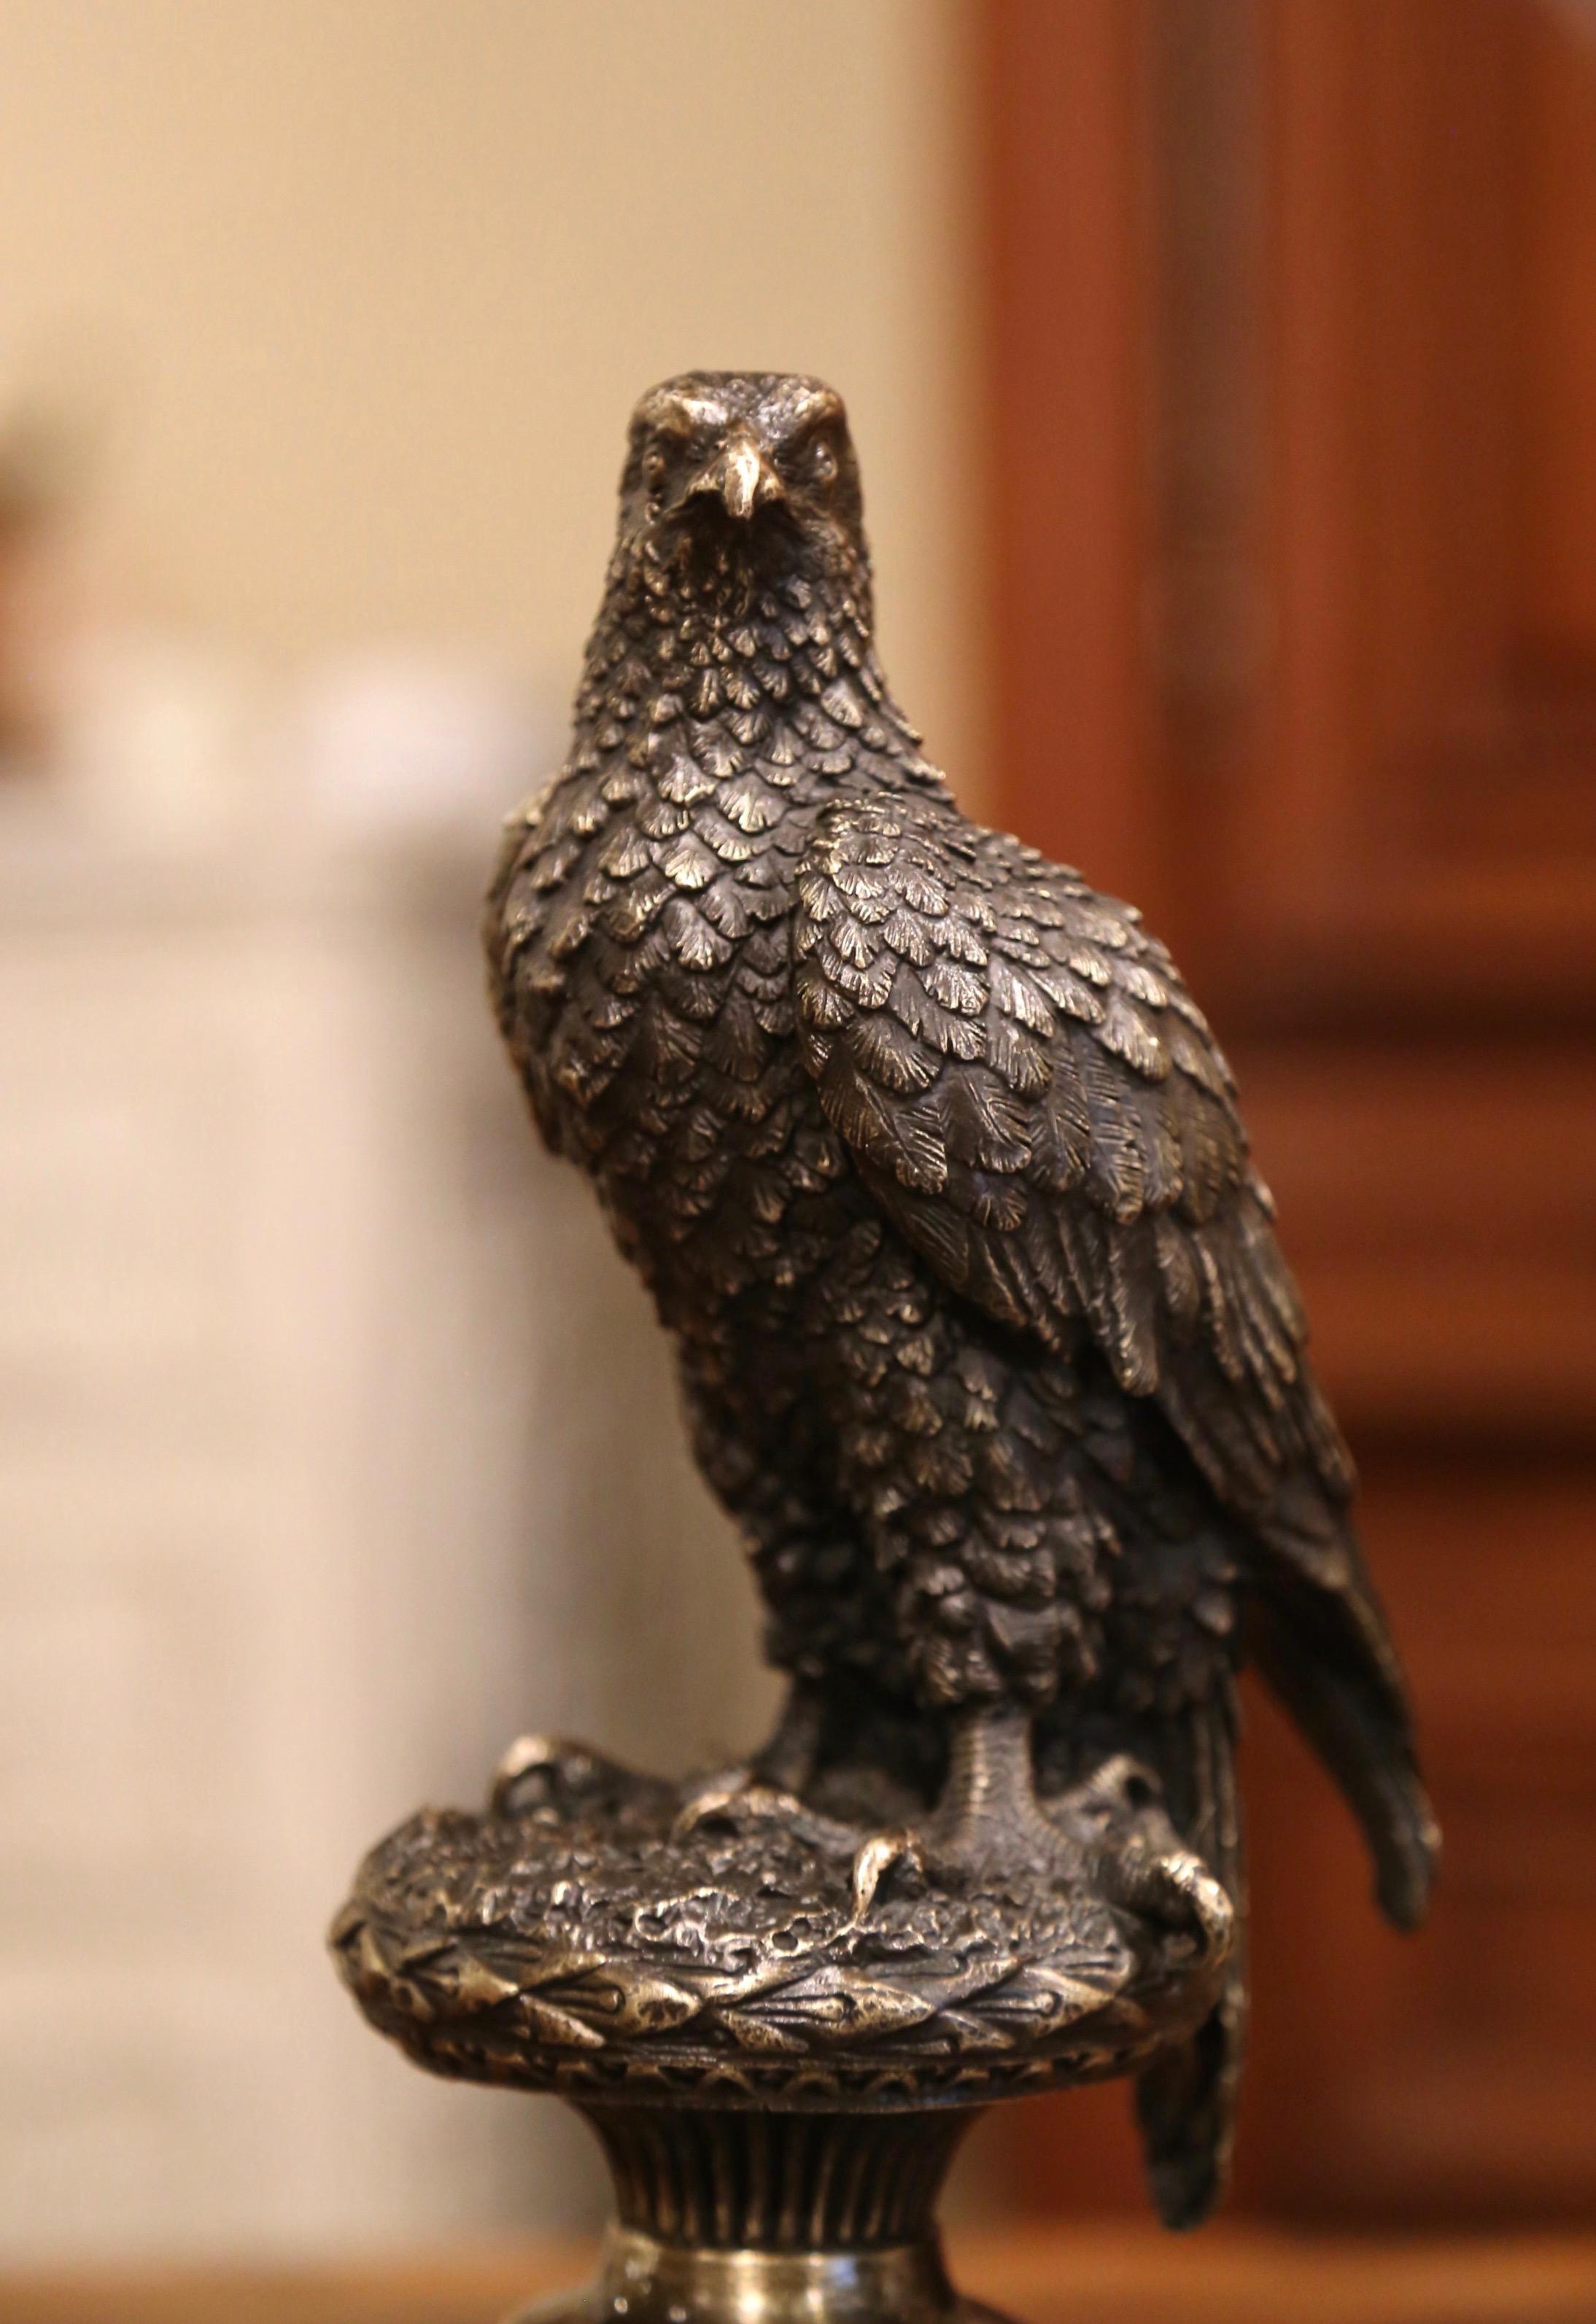 Created in France circa 1950, the sculpture depicts a young feathered eagle with large talons perched on a round gilt base. The piece which has reeding and fluting also mounted on an integral neoclassical style real black marble lower base. The